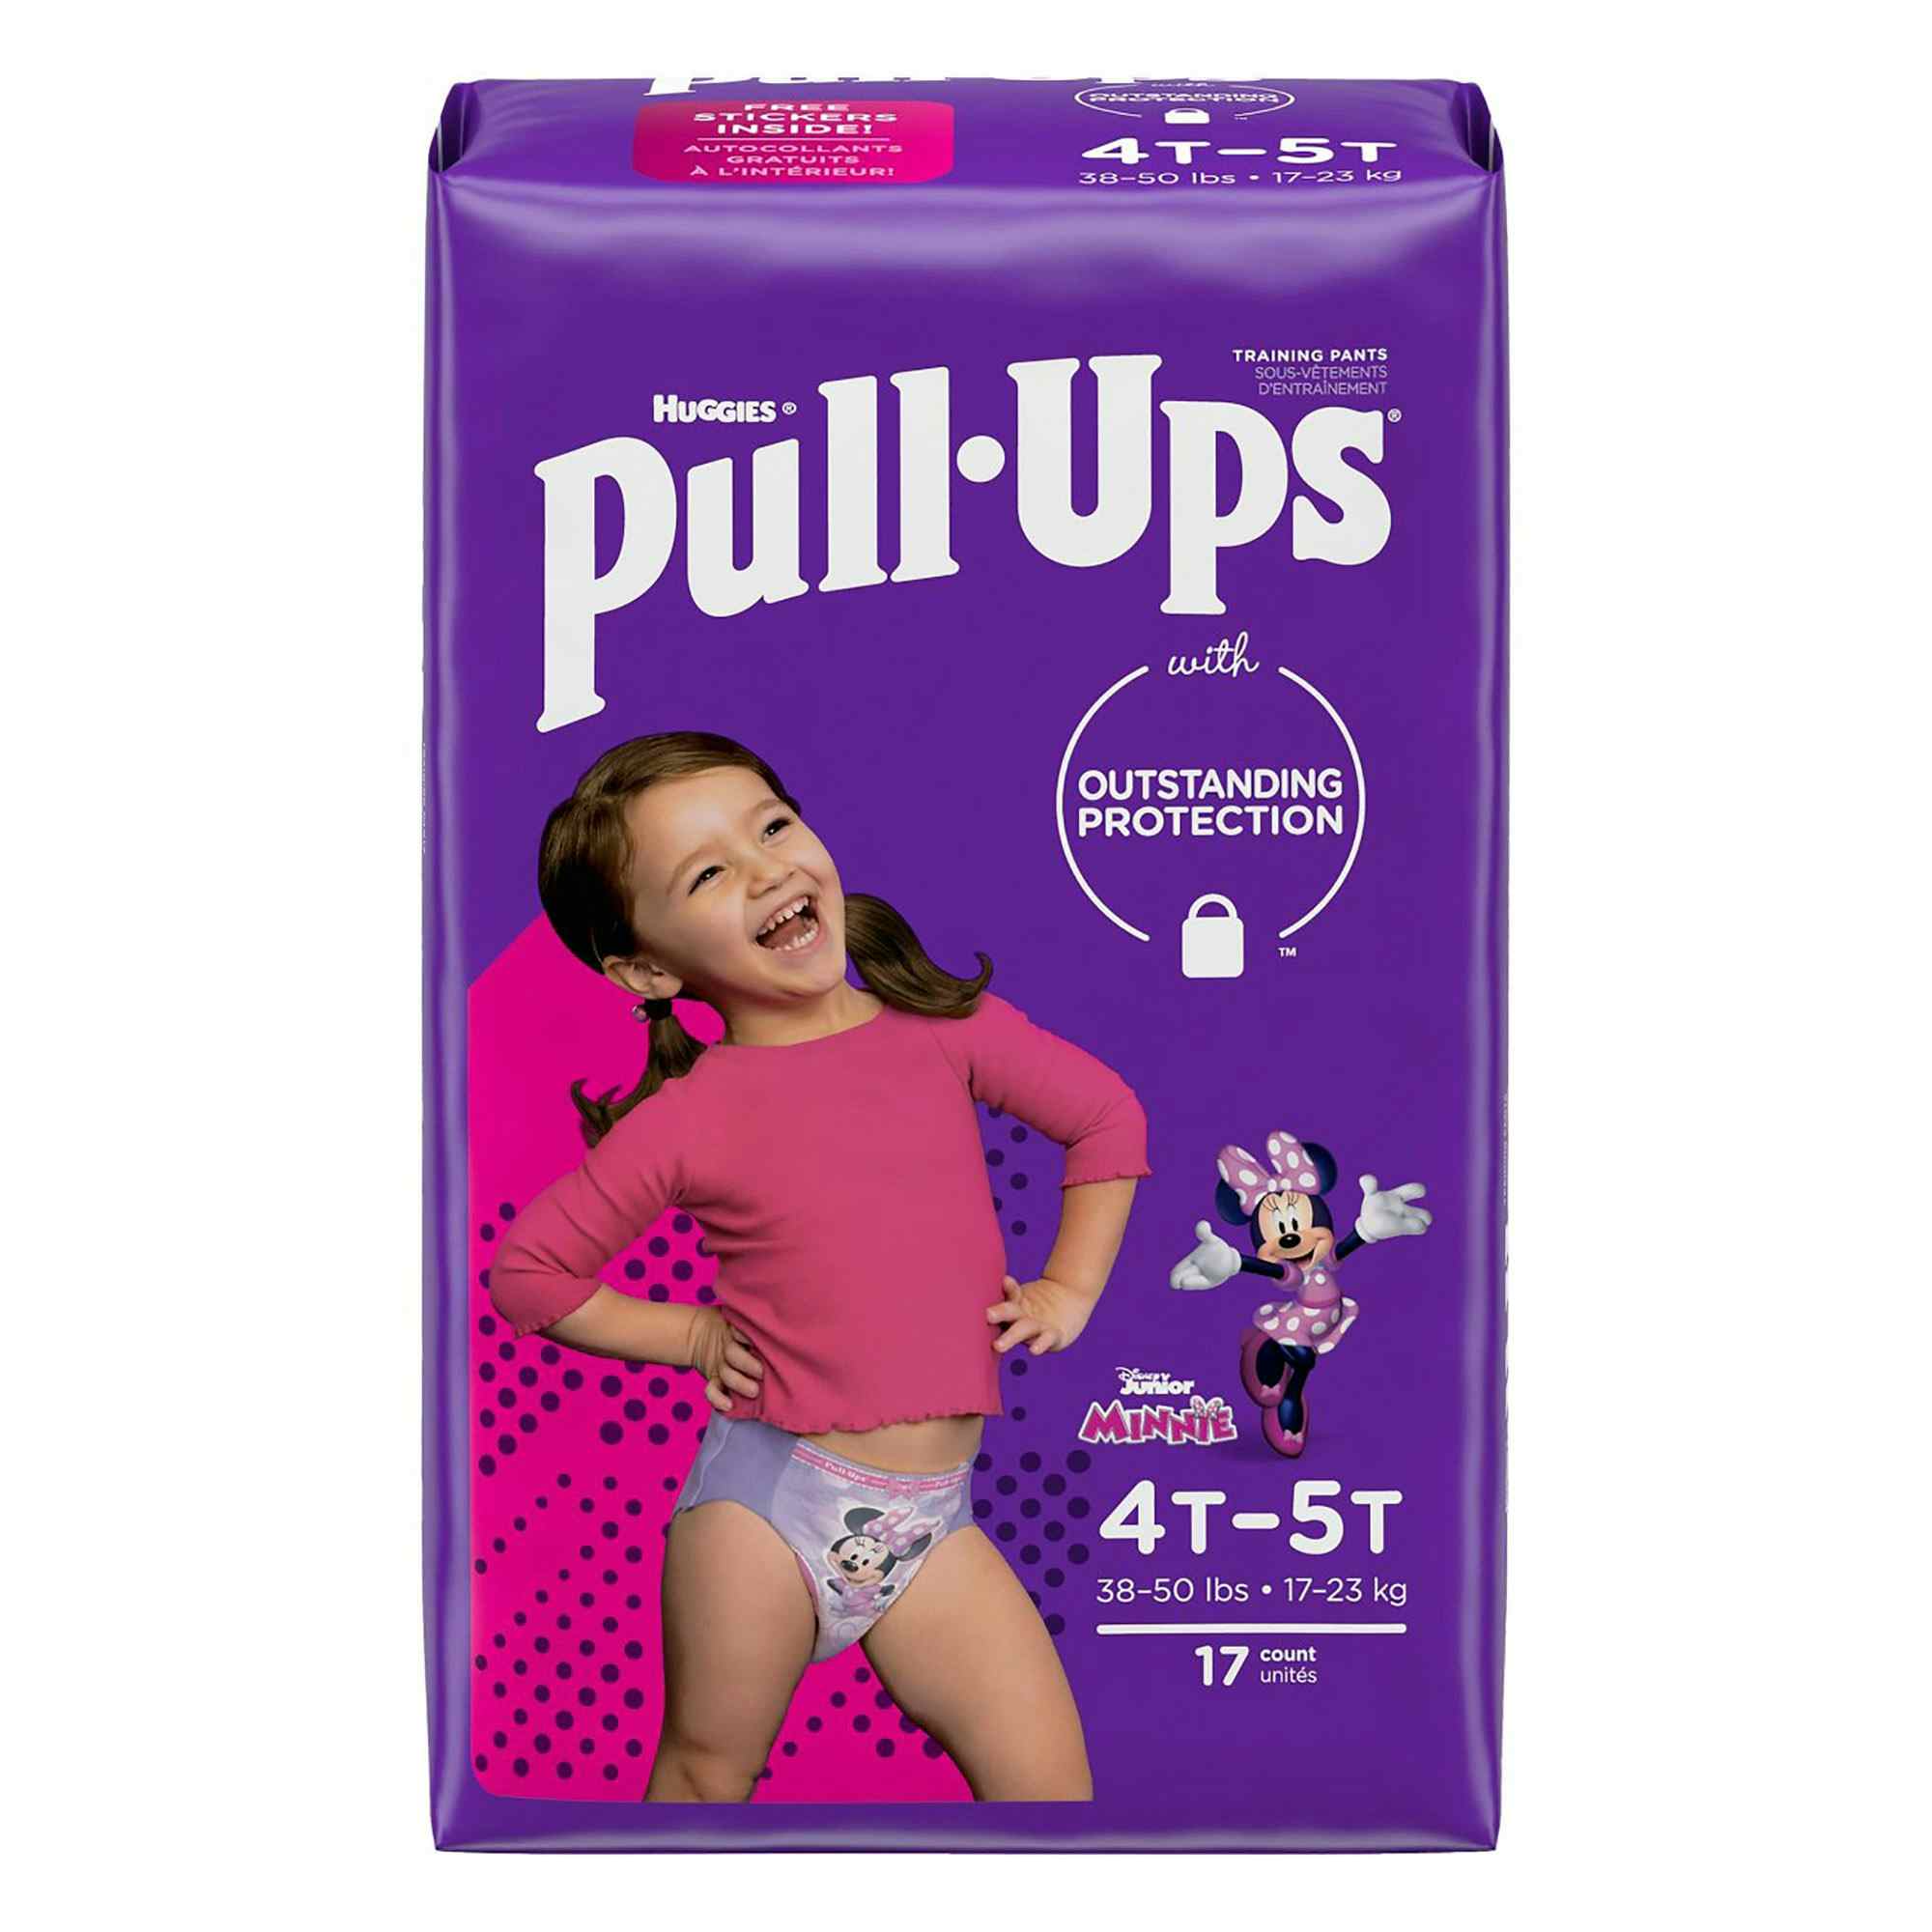 Huggies Girls Pull-Ups with Outstanding Protection, Moderate Absorbency, 51357, 4T-5T (38-50 lbs) - Pack of 17